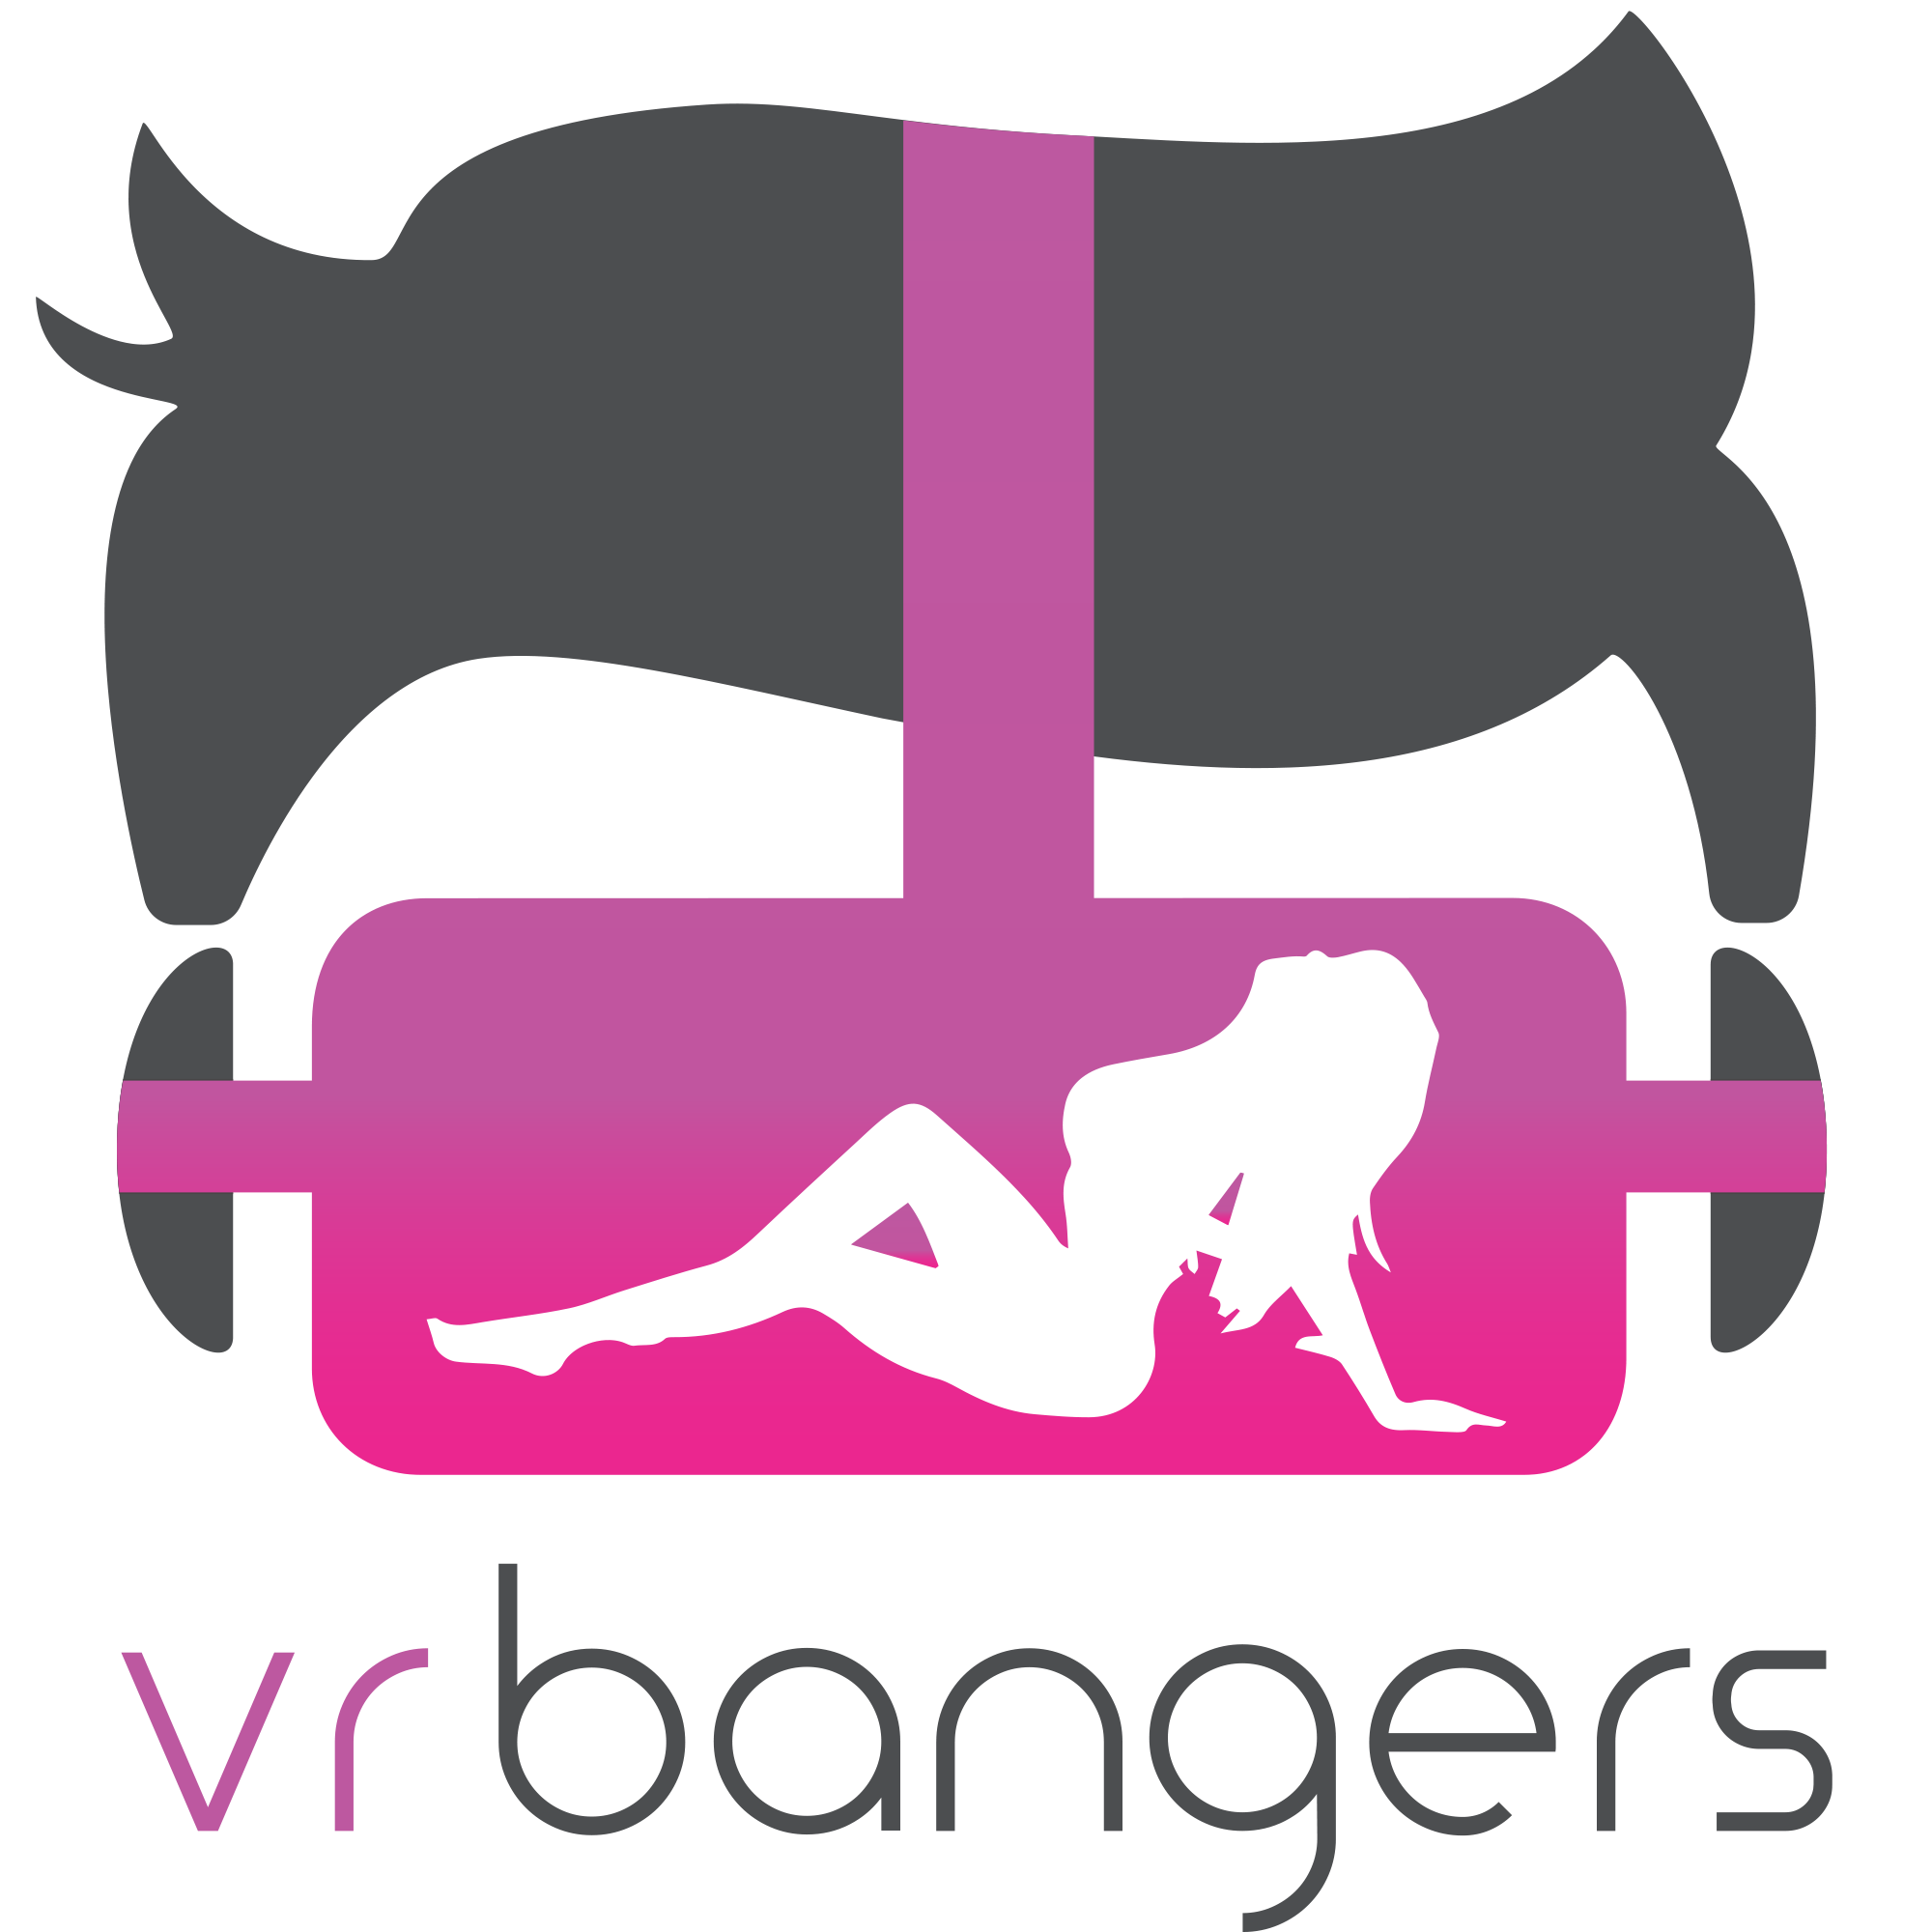 preview image password  for vrbangers.com